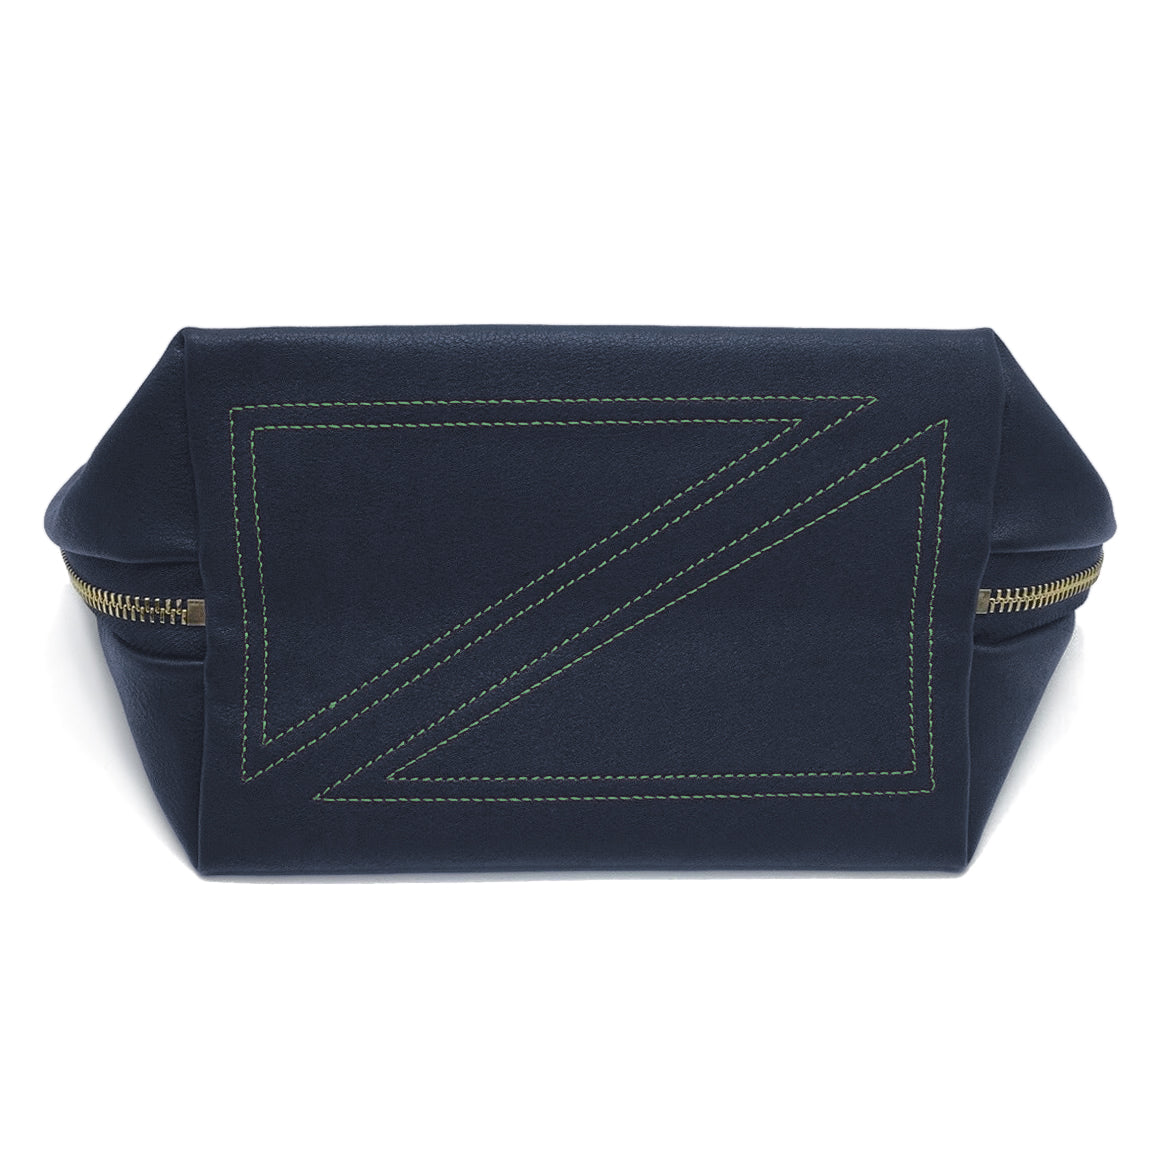 color: Navy Fabric with Mint Interior;